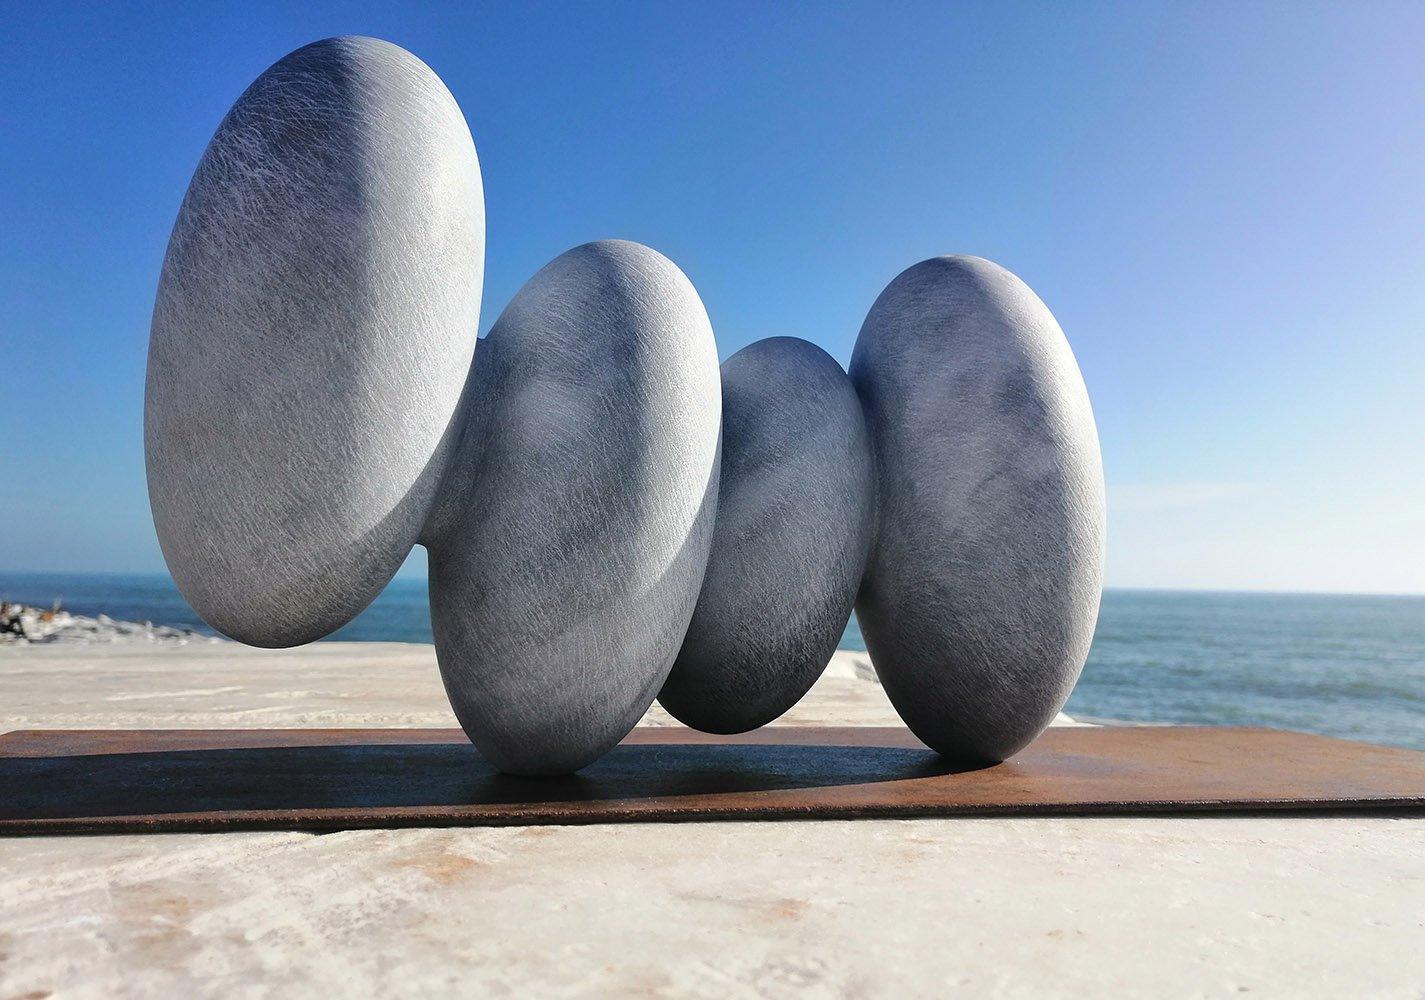 Connections is a unique white Carrara marble sculpture by contemporary artist Francesca Bernardini, dimensions are 20 × 43 × 19 cm (7.9 × 16.9 × 7.5 in). The sculpture is maintained on the iron base with a rod but it is movable. 

The Connections